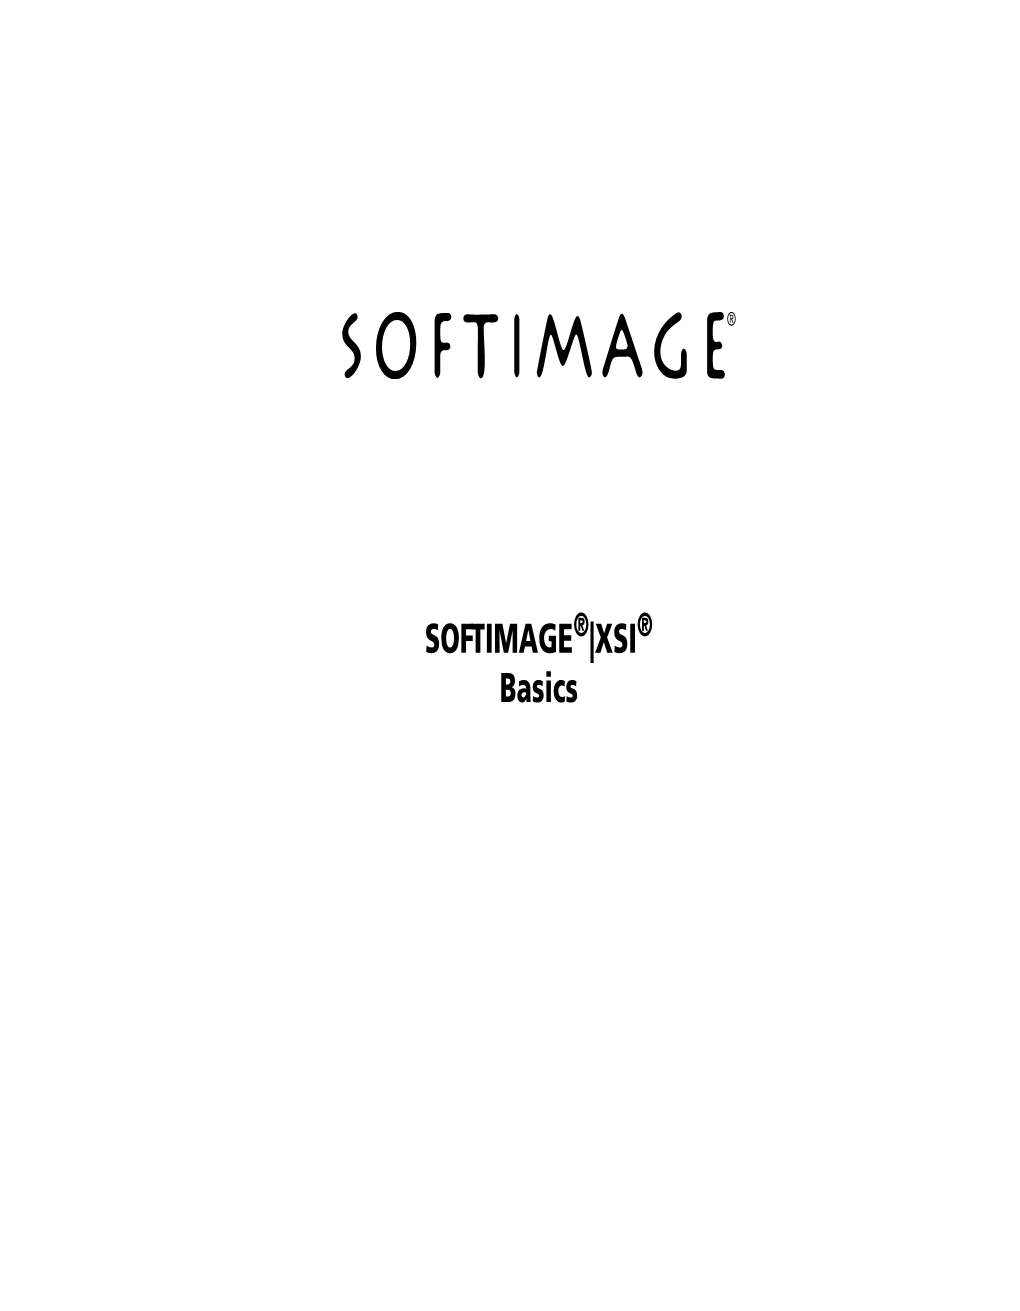 SOFTIMAGE|XSI Uses Jscript and Visual Basic Scripting Edition from Microsoft LIMITED TO, PROCUREMENT of SUBSTITUTE GOODS OR SERVICES; LOSS of Corporation